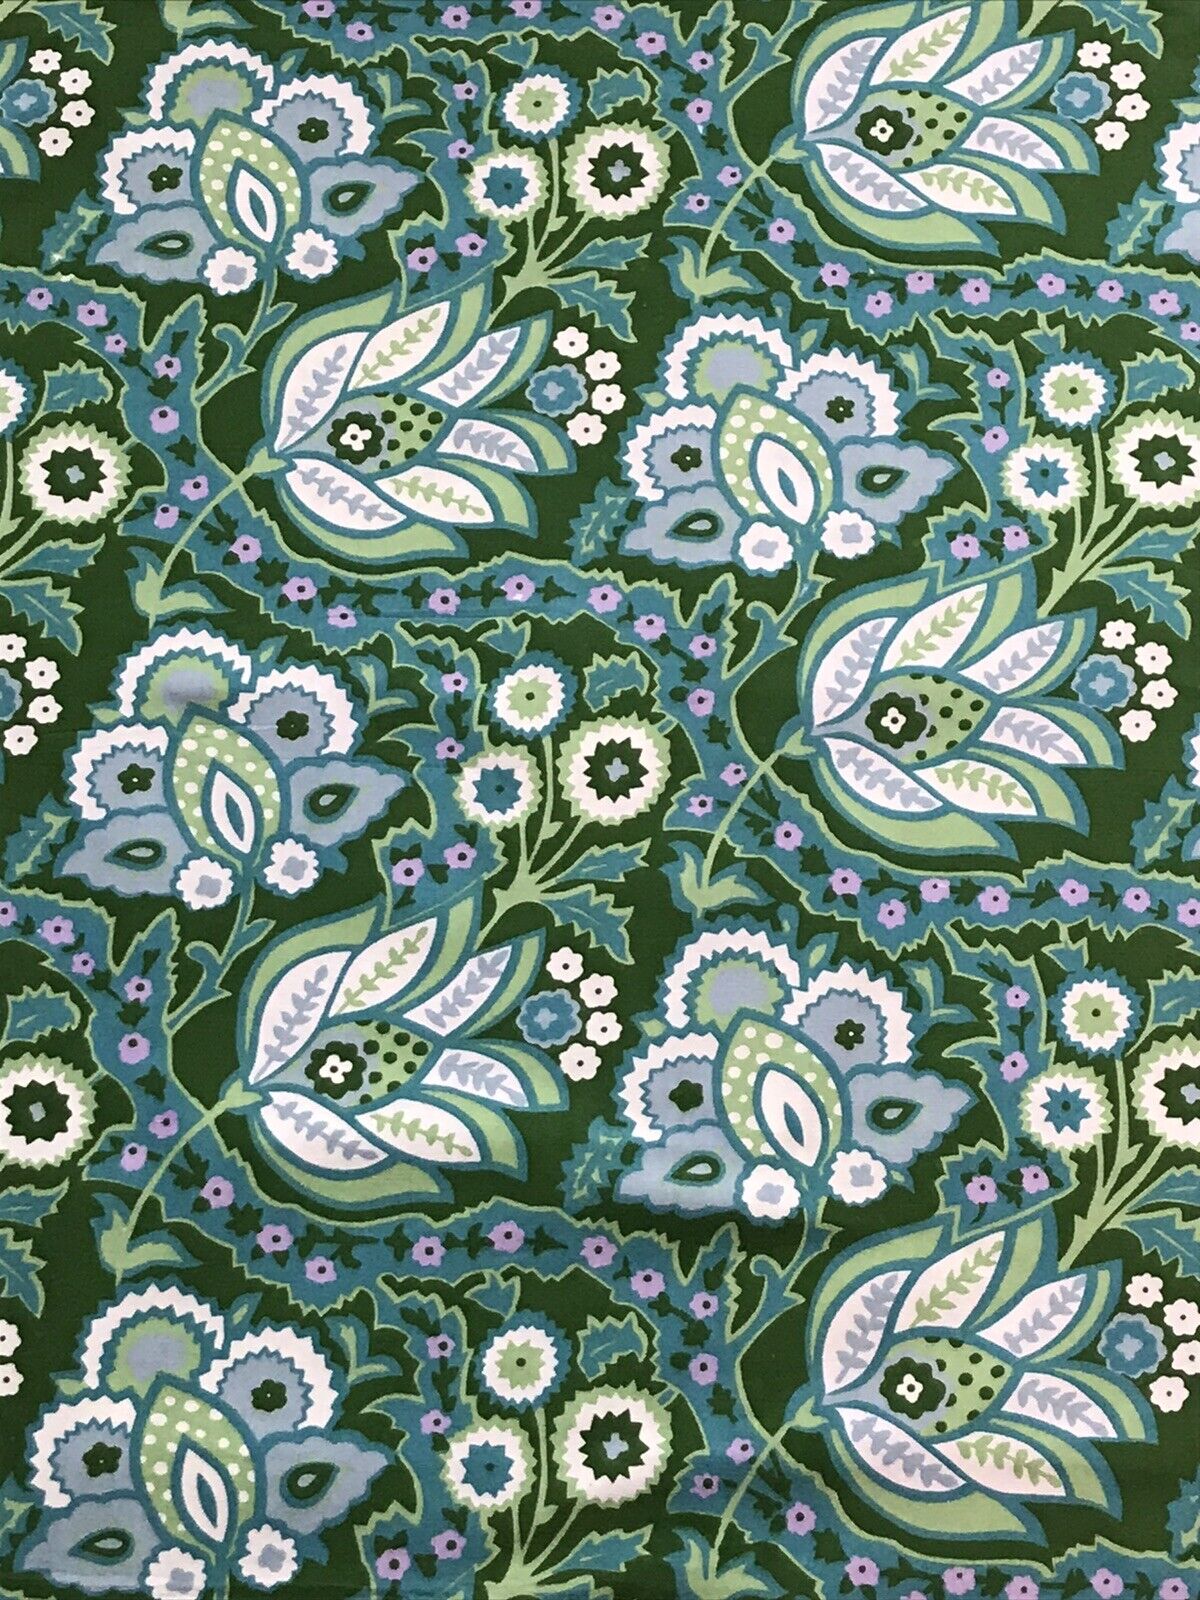 Jonelle Fabric 1969 ‘ Rebecca’ Bottle Green, Teal&Lilac Floral FQ 56x46cm New